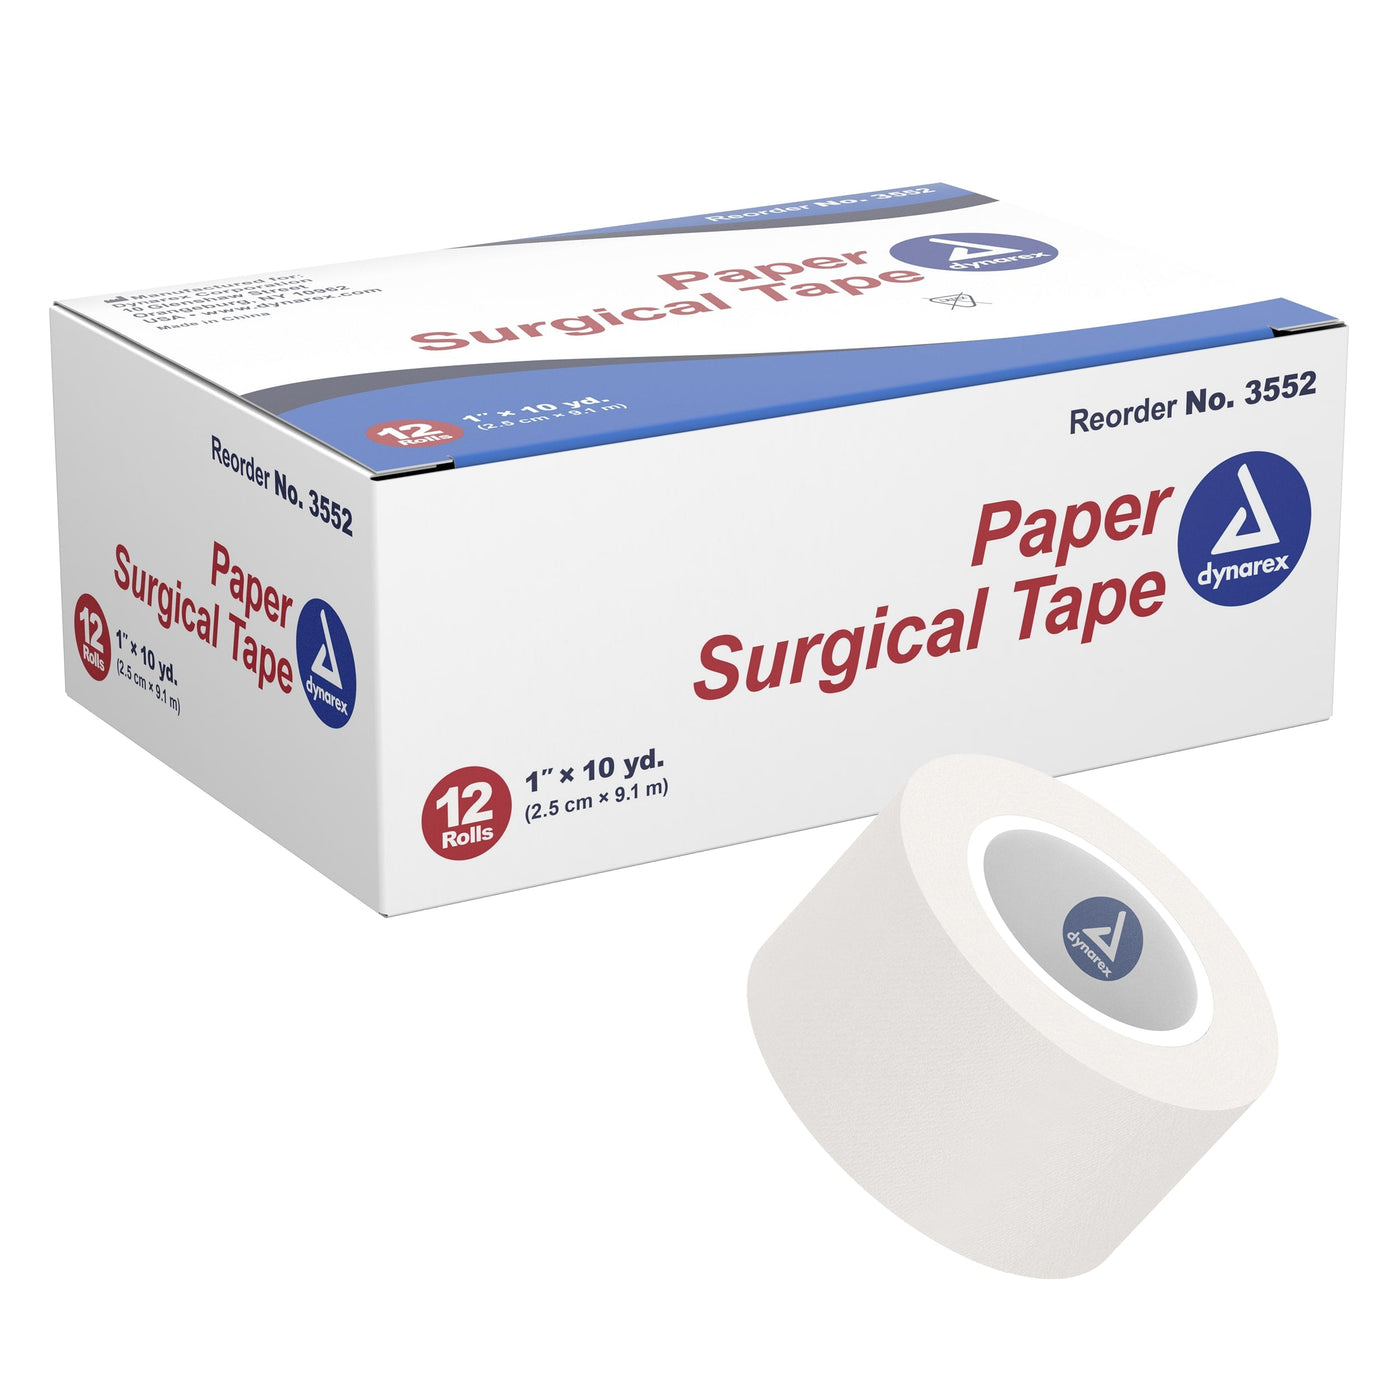 Dynarex Paper Surgical Tape - Station Prep. & Barriers - Mithra Tattoo Supplies Canada